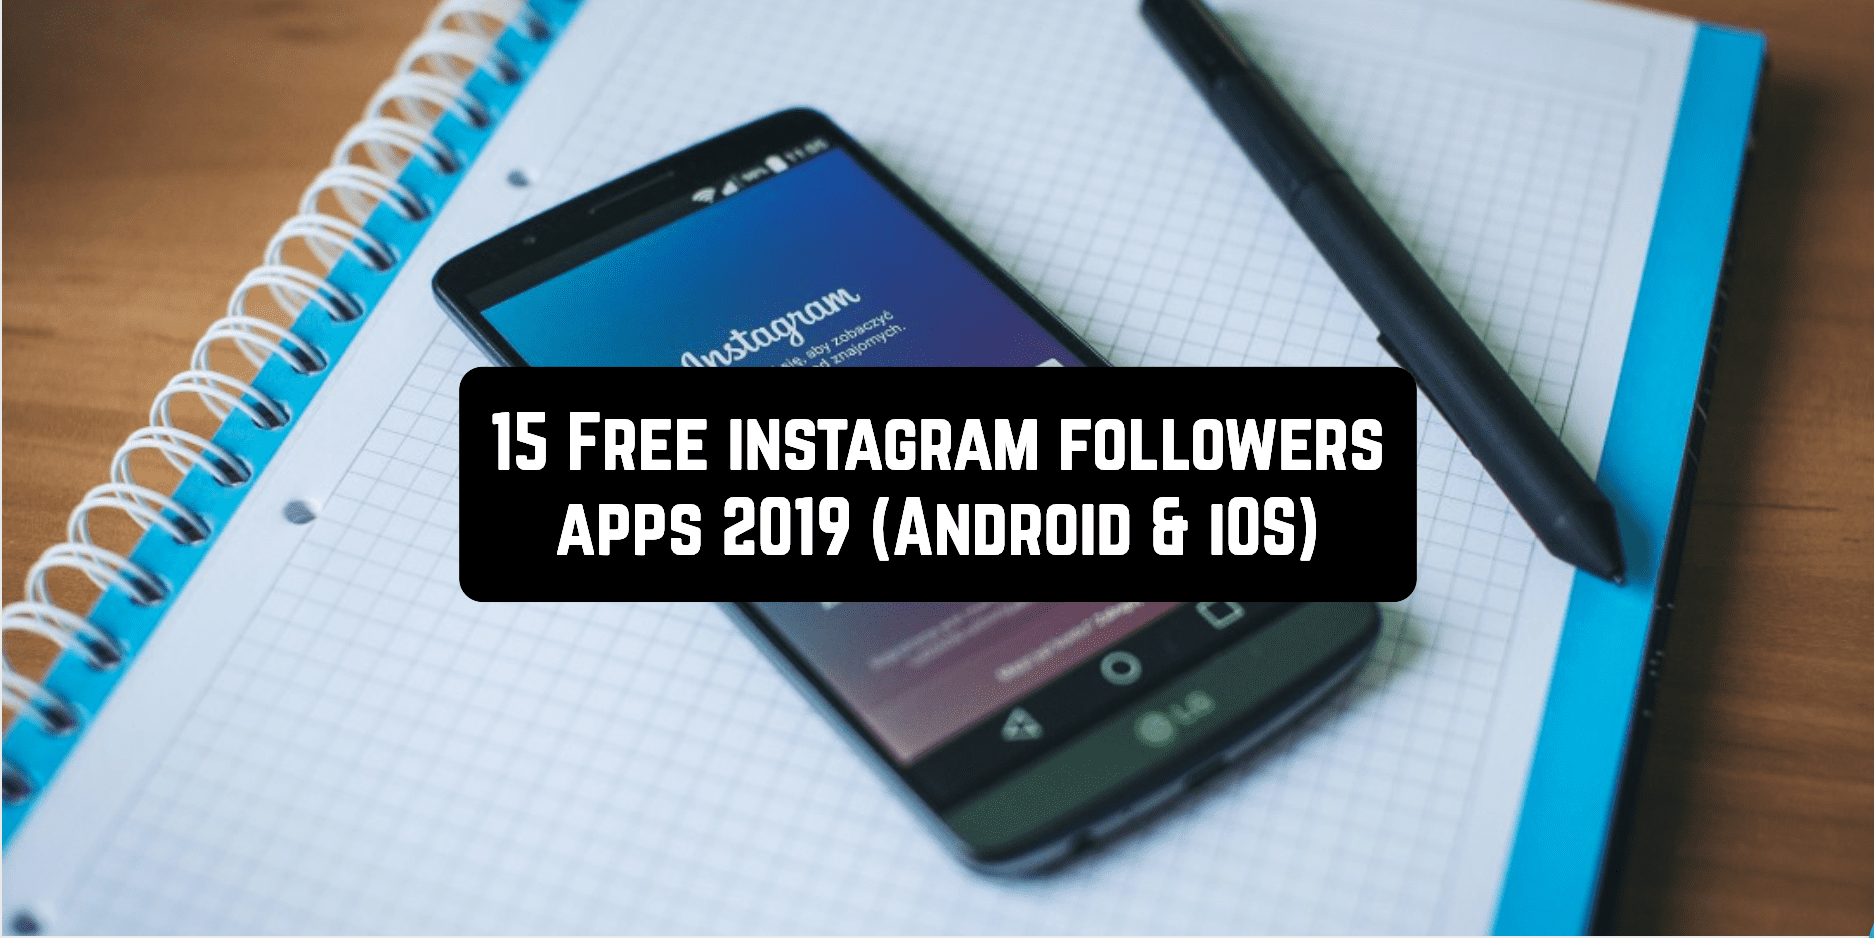 15 Free instagram followers apps 2019 (Android & iOS)